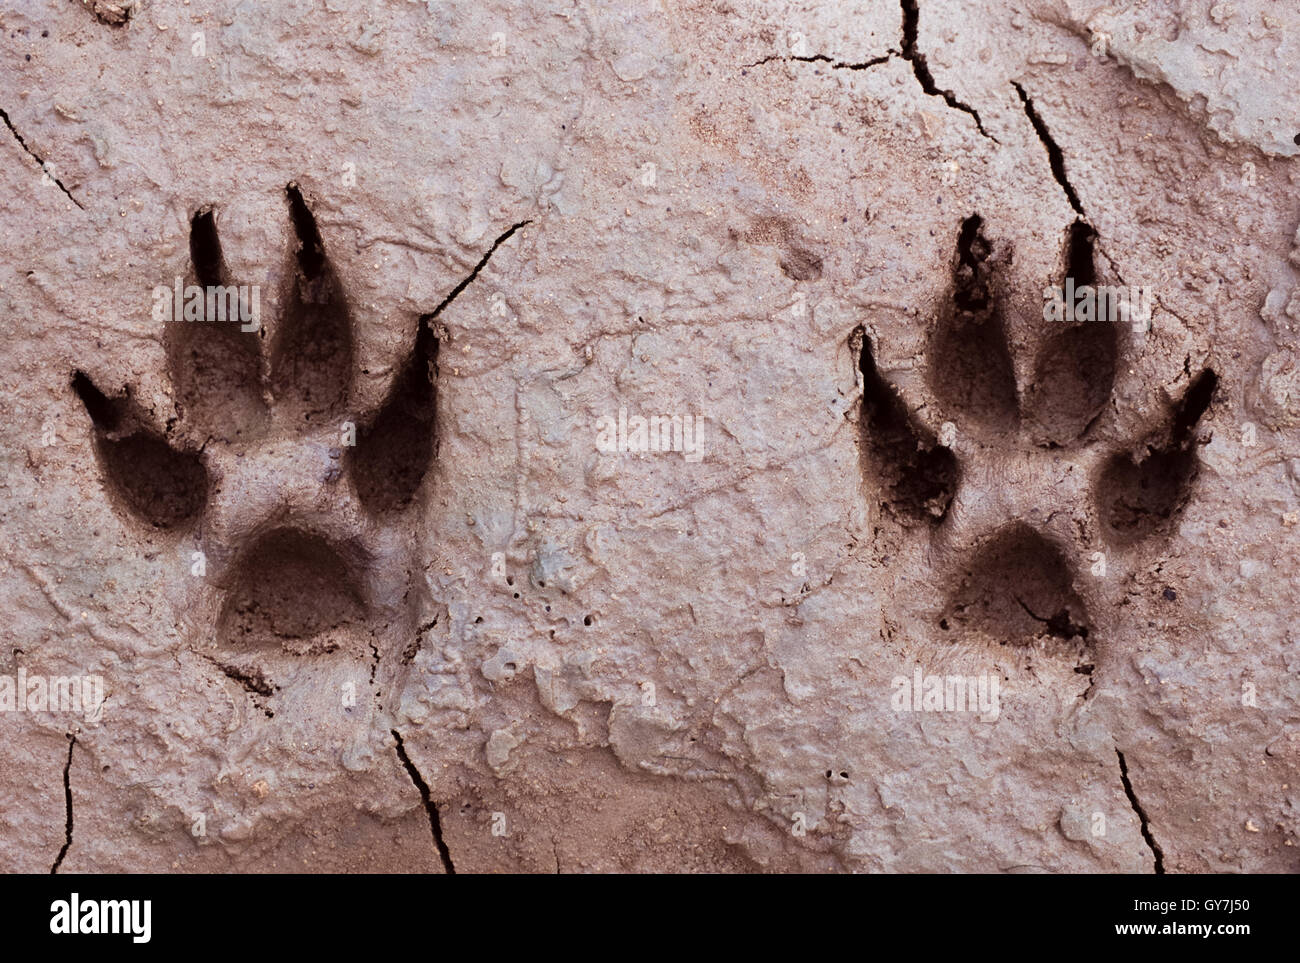 Indian Jackal, Canis aureus indicus, two paw prints in mud, Gujarat, India. The prints show the jackal's two fore paws. Stock Photo